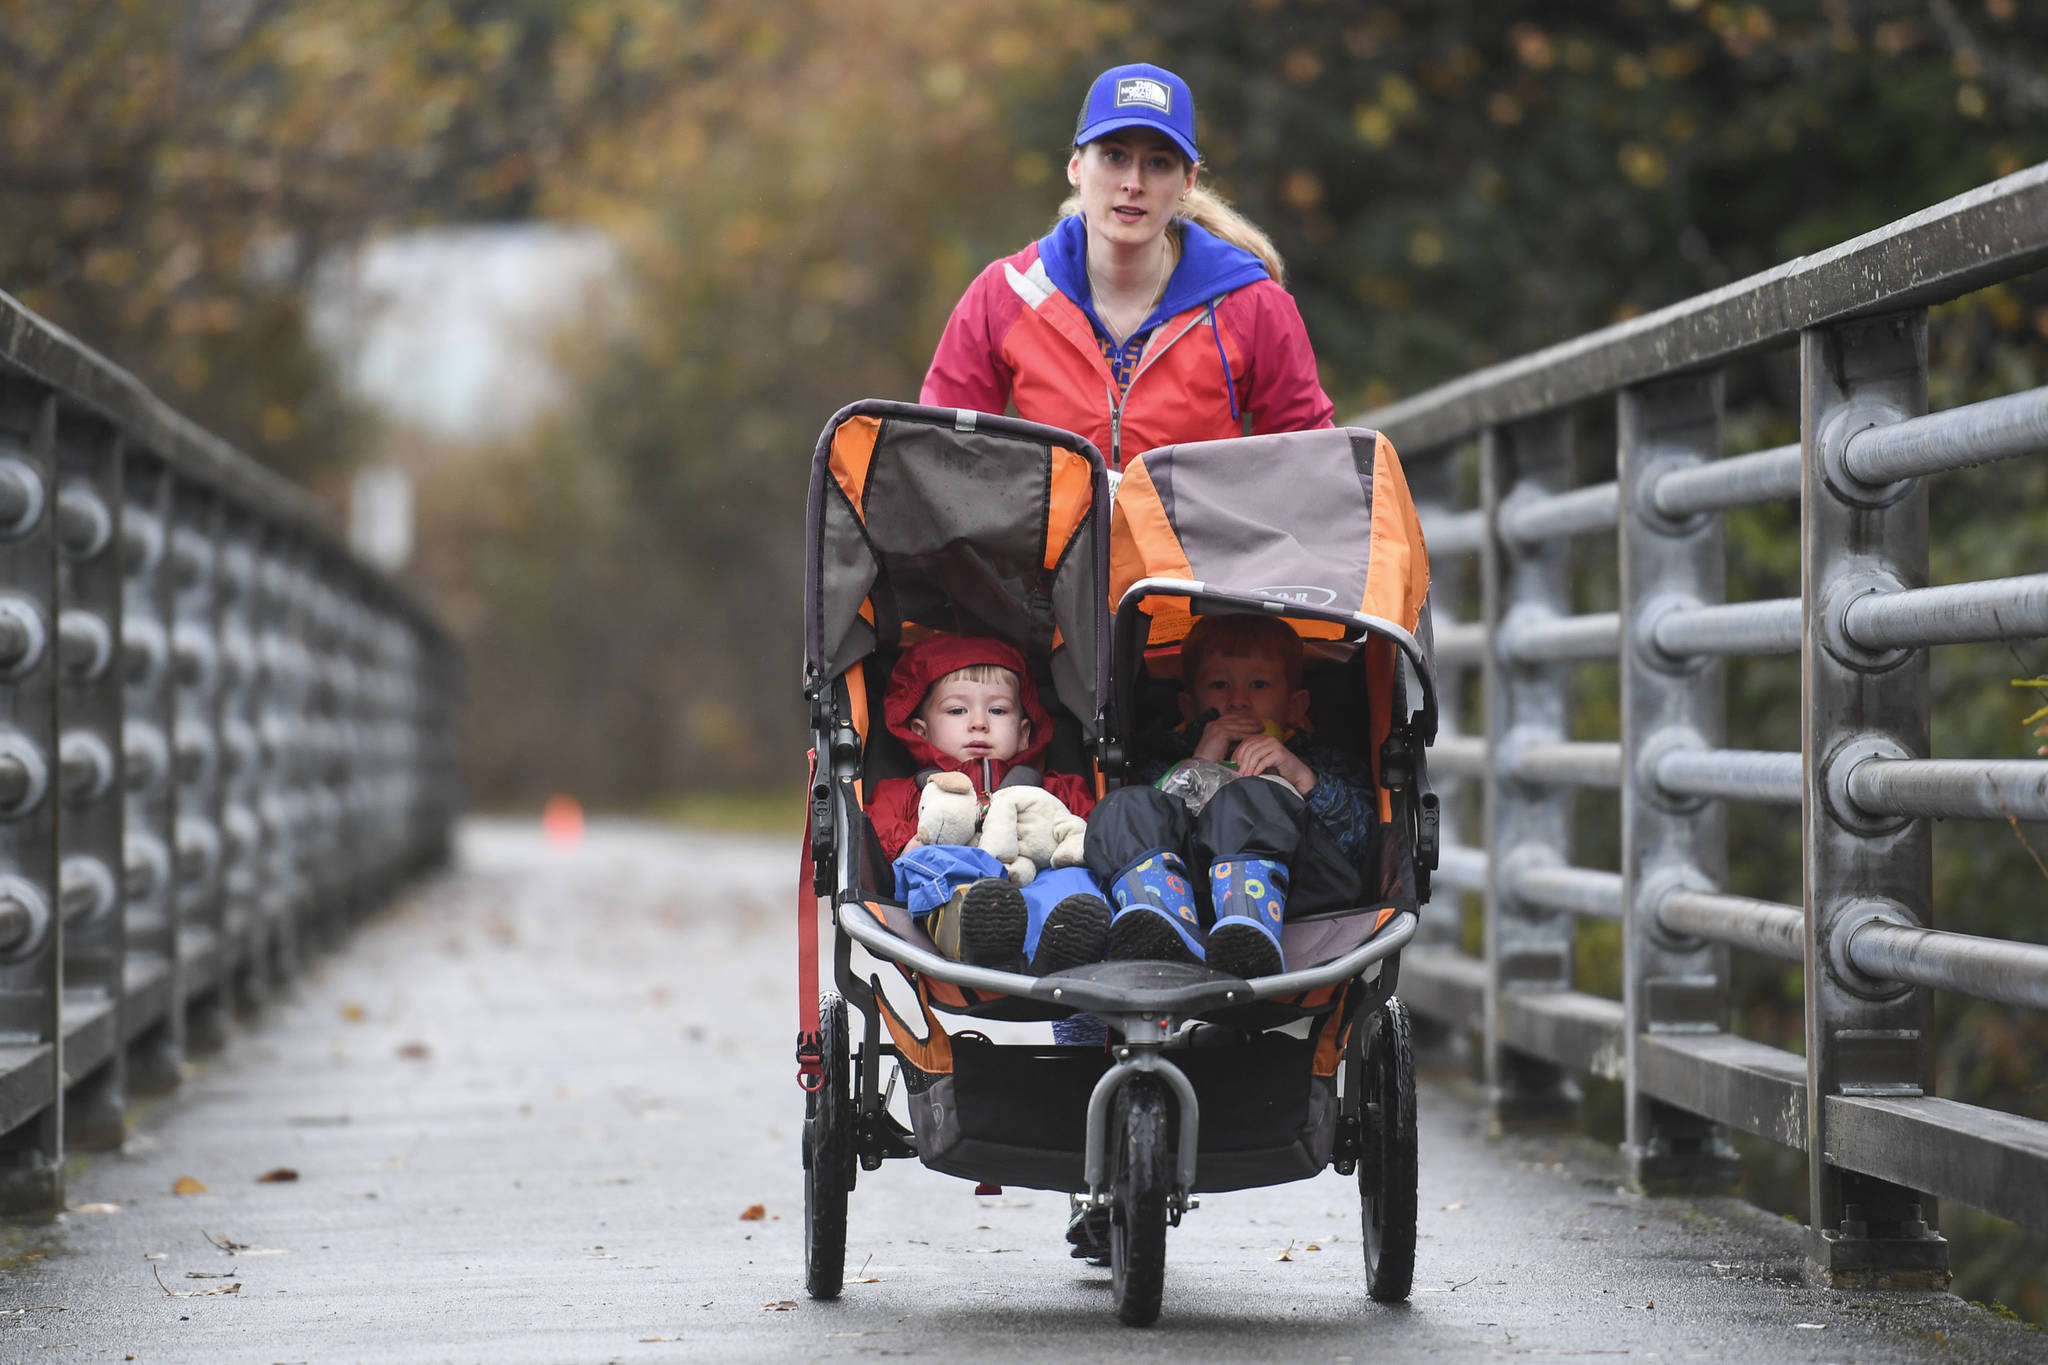 Crystal Schmitz participates with her young children in the annual community mental health run, the Extra Tough 5K & 1 Mile Run, on Saturday, Oct. 12, 2019, starting at Riverbend Elementary School. The run is sponsored by National Alliance on Mental Illness (NAMI) Juneau. (Michael Penn | Juneau Empire)